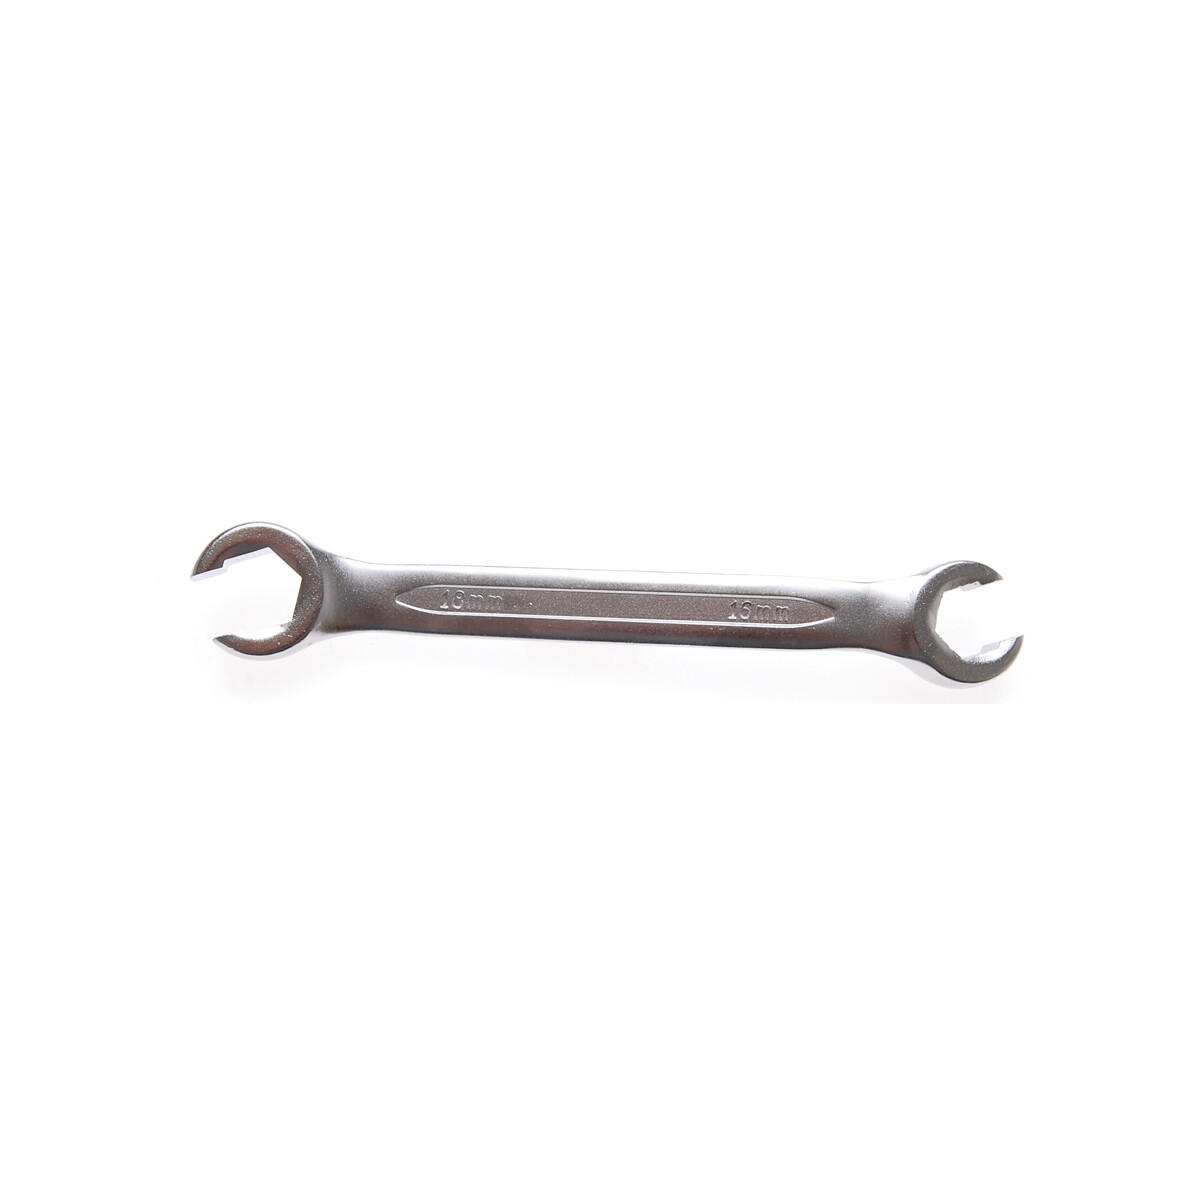 BGS Double Ring Spanner, open Type | 16 x 18 mm (BGS...